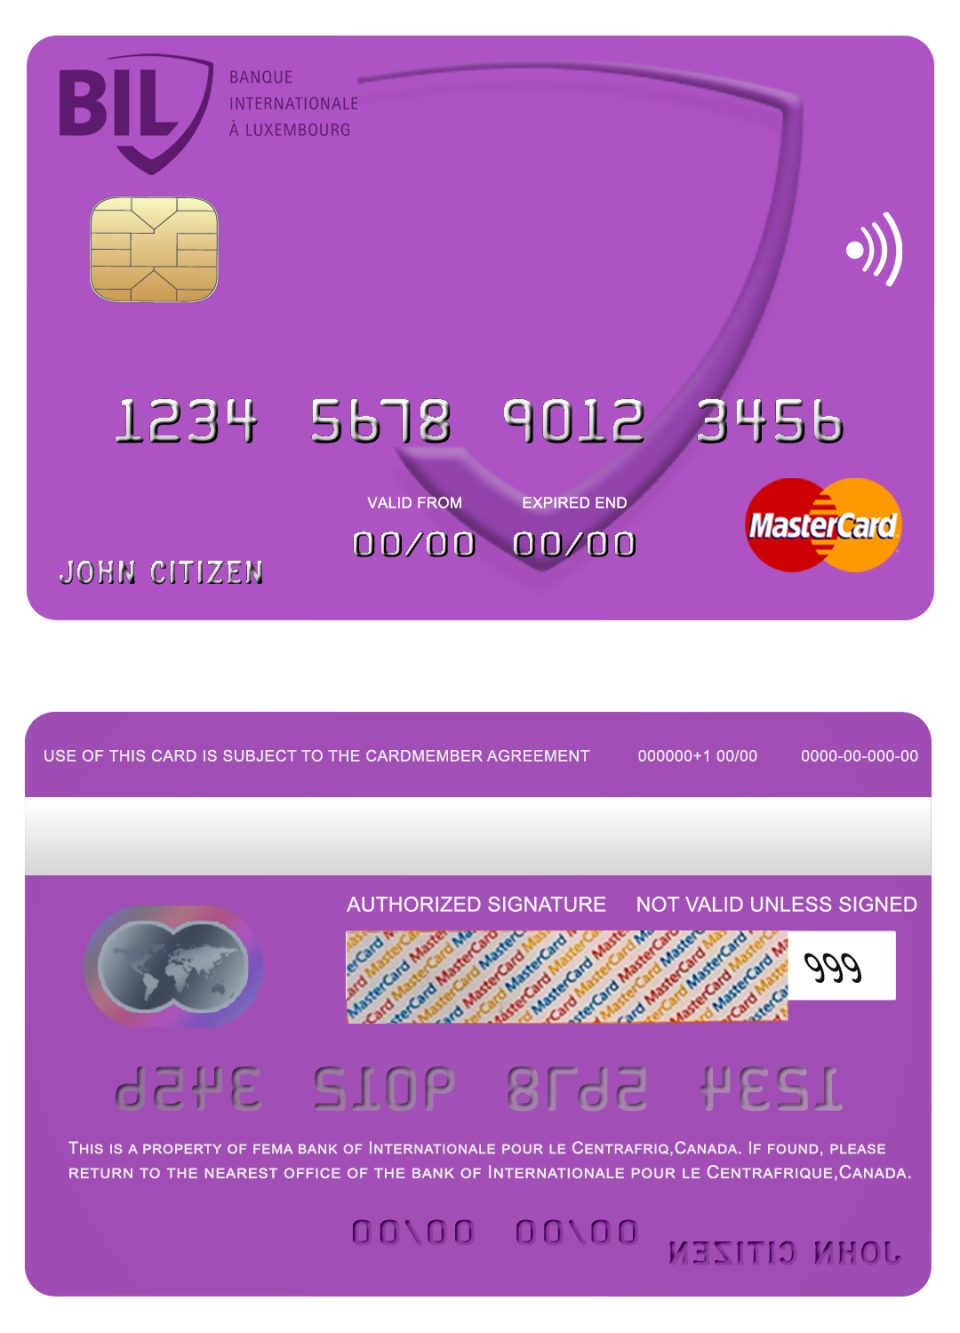 Fillable Canada Internationale pour le Centrafrique bank mastercard Templates | Layer-Based PSD